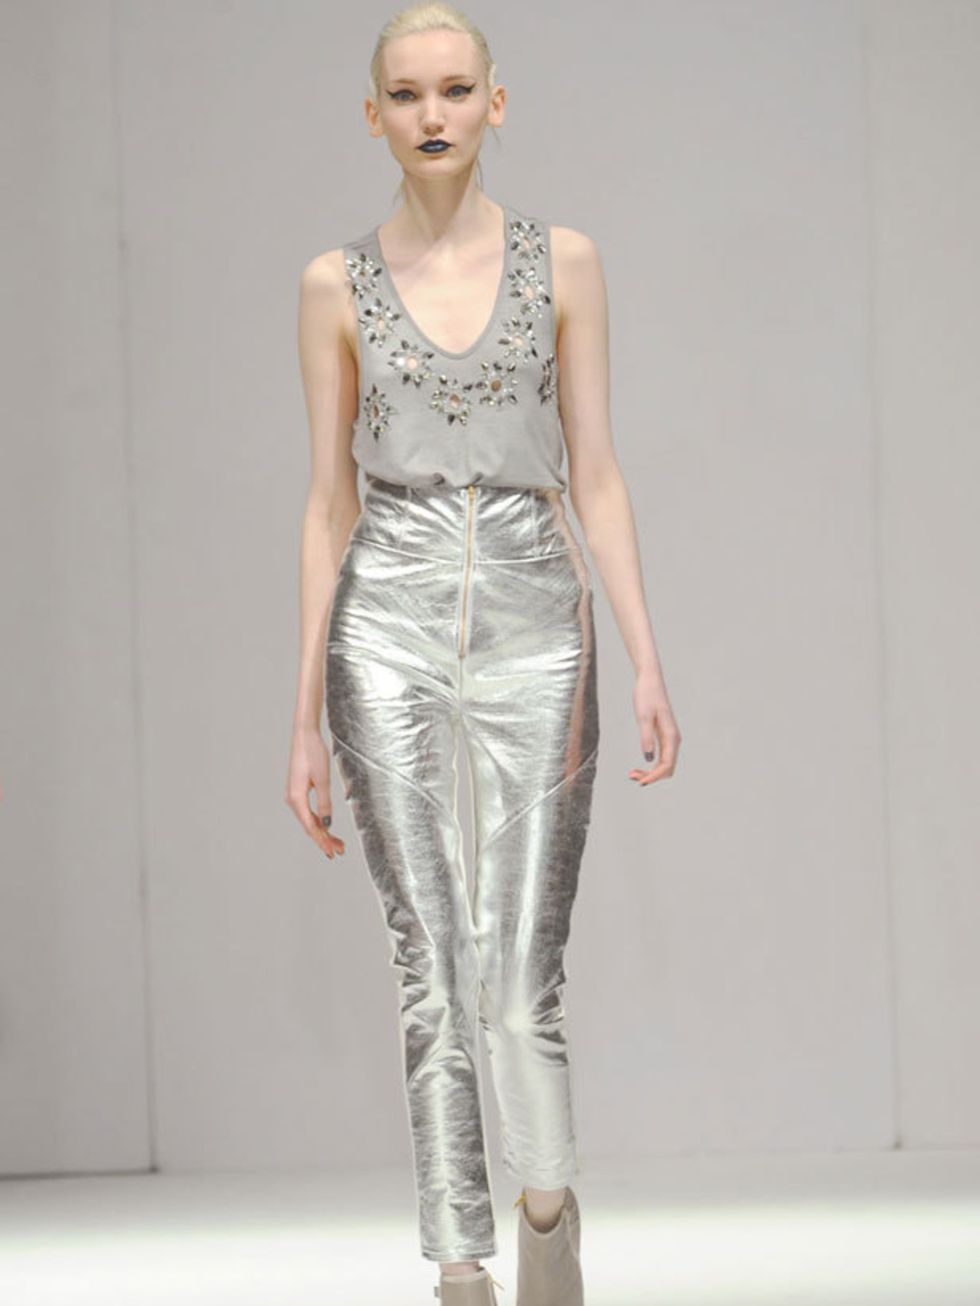 <p><strong>The Metallic Trousers</strong></p><p><strong>The Look:</strong> Skinny metallic trousers are big news for the new season. Sadly, they are not the most figure-flattering material especially for the derriere, but this exercise should get you in s